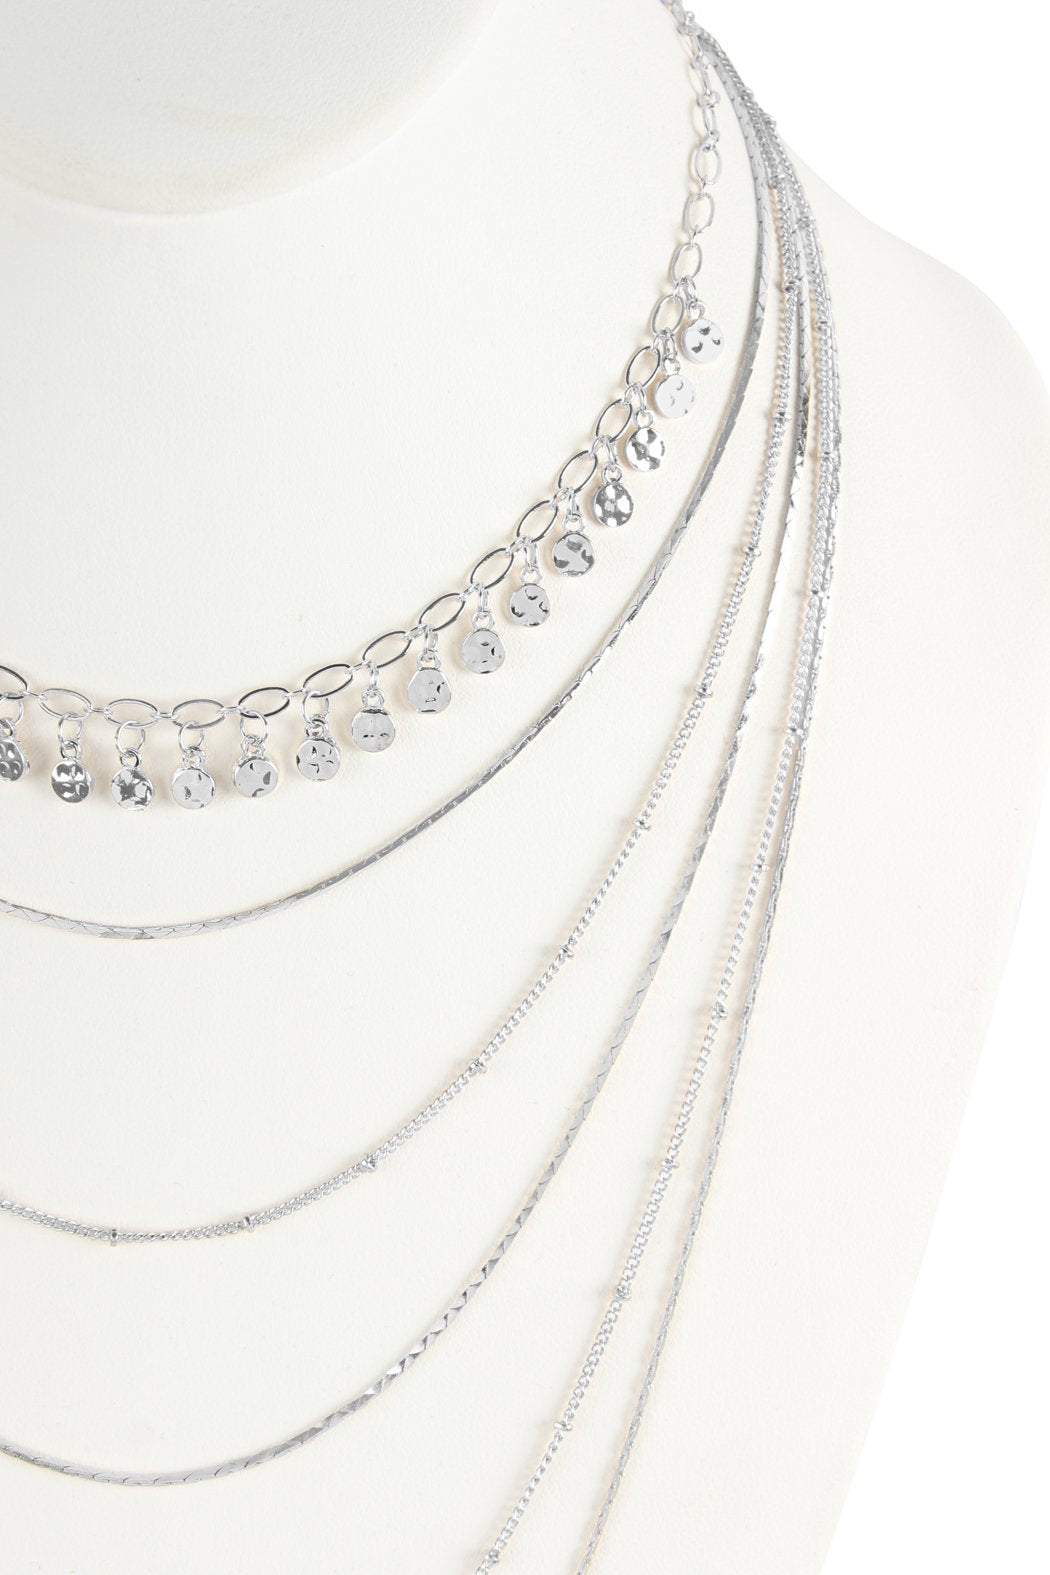 Hdn2640 - Delicate Layer Necklaces - LOLA LUXE